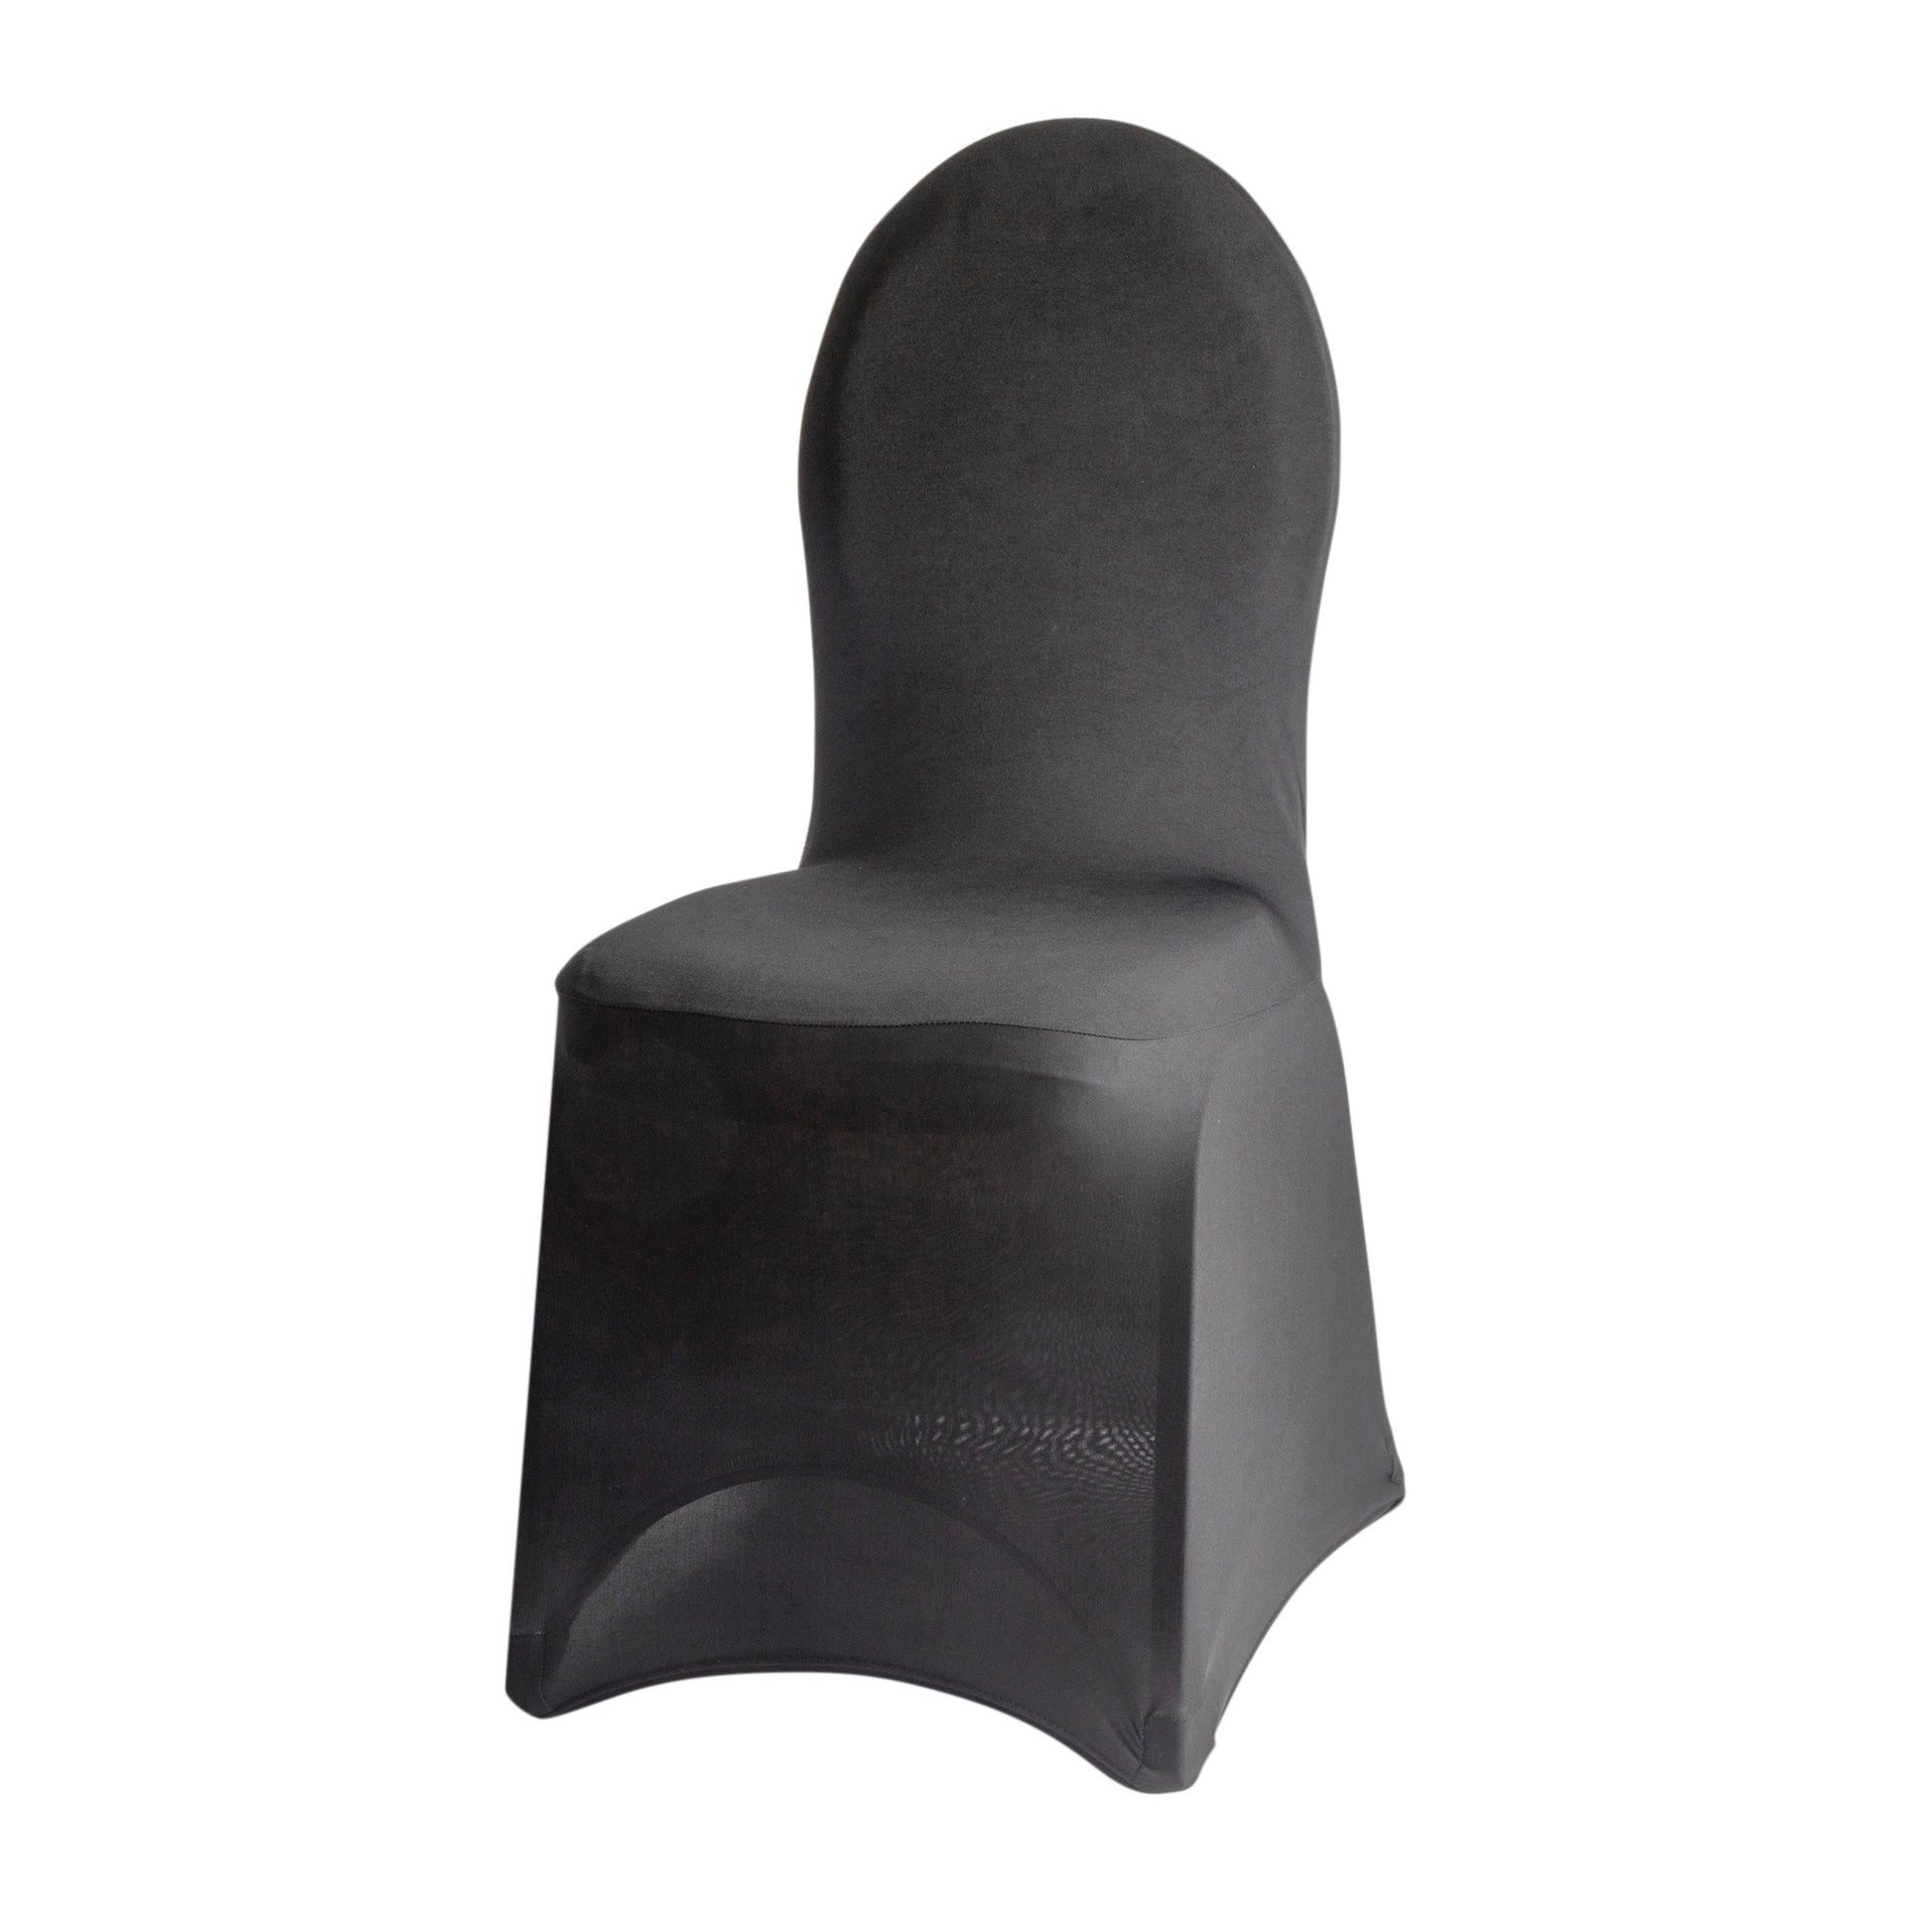 Shimmer Tinsel Banquet Spandex Chair Cover - Black